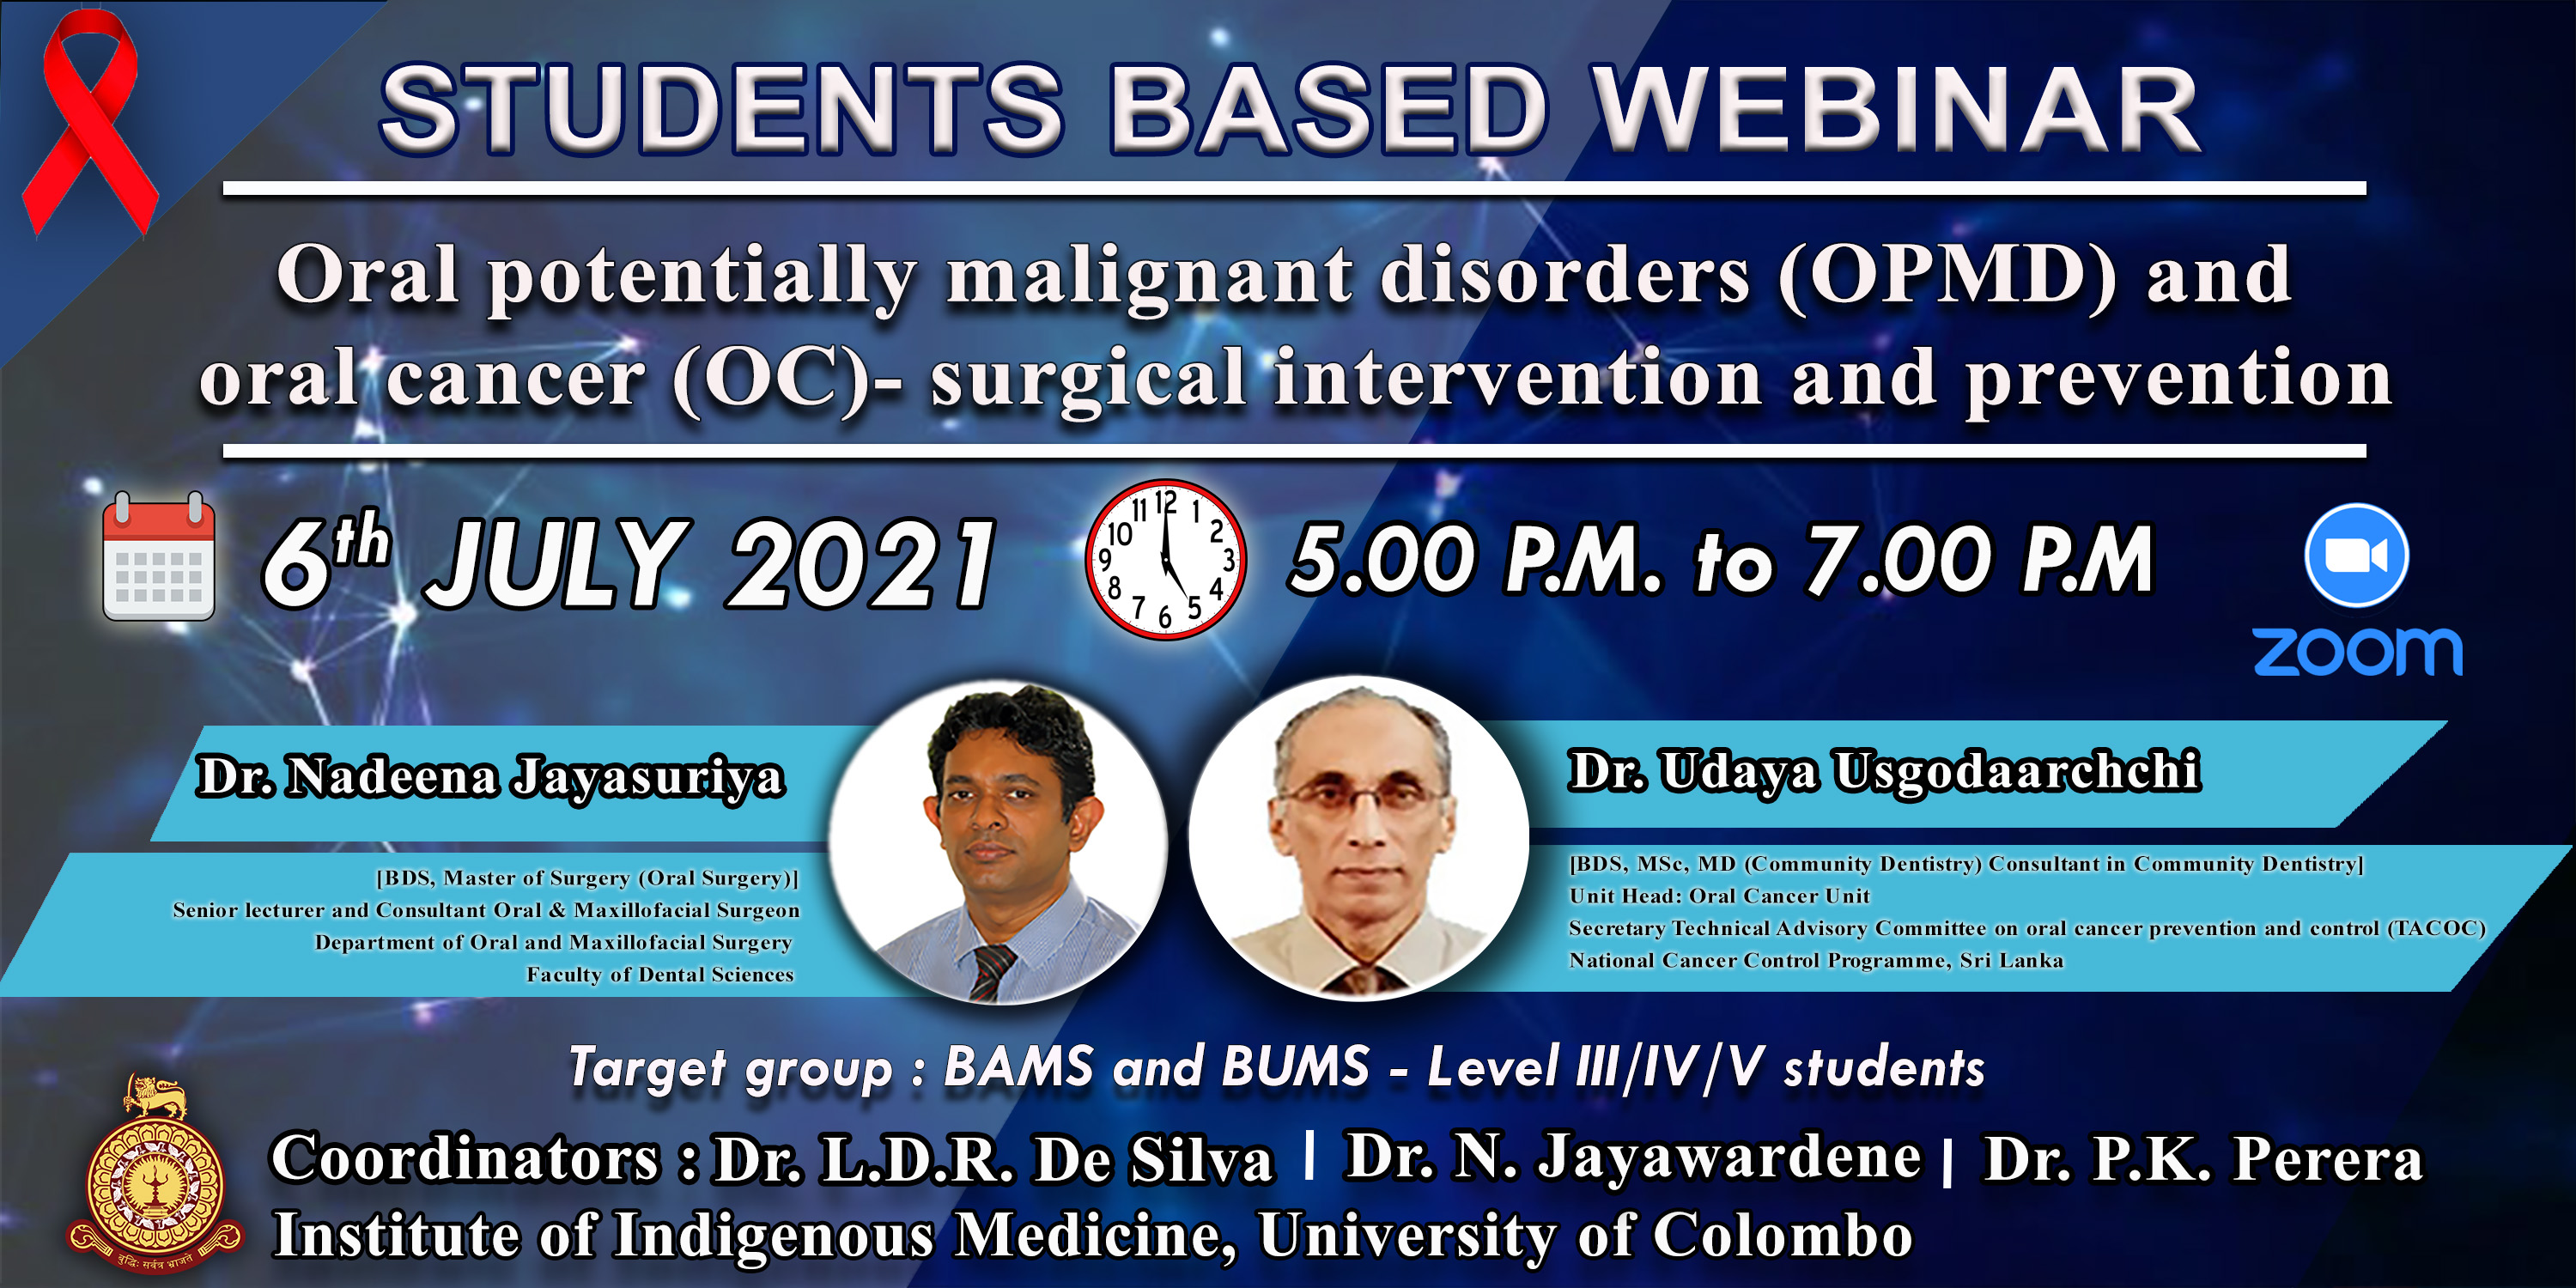 Students Based Webinar: Oral potentially malignant disorders (OPMD) and oral cancer (OC)- surgical intervention and prevention